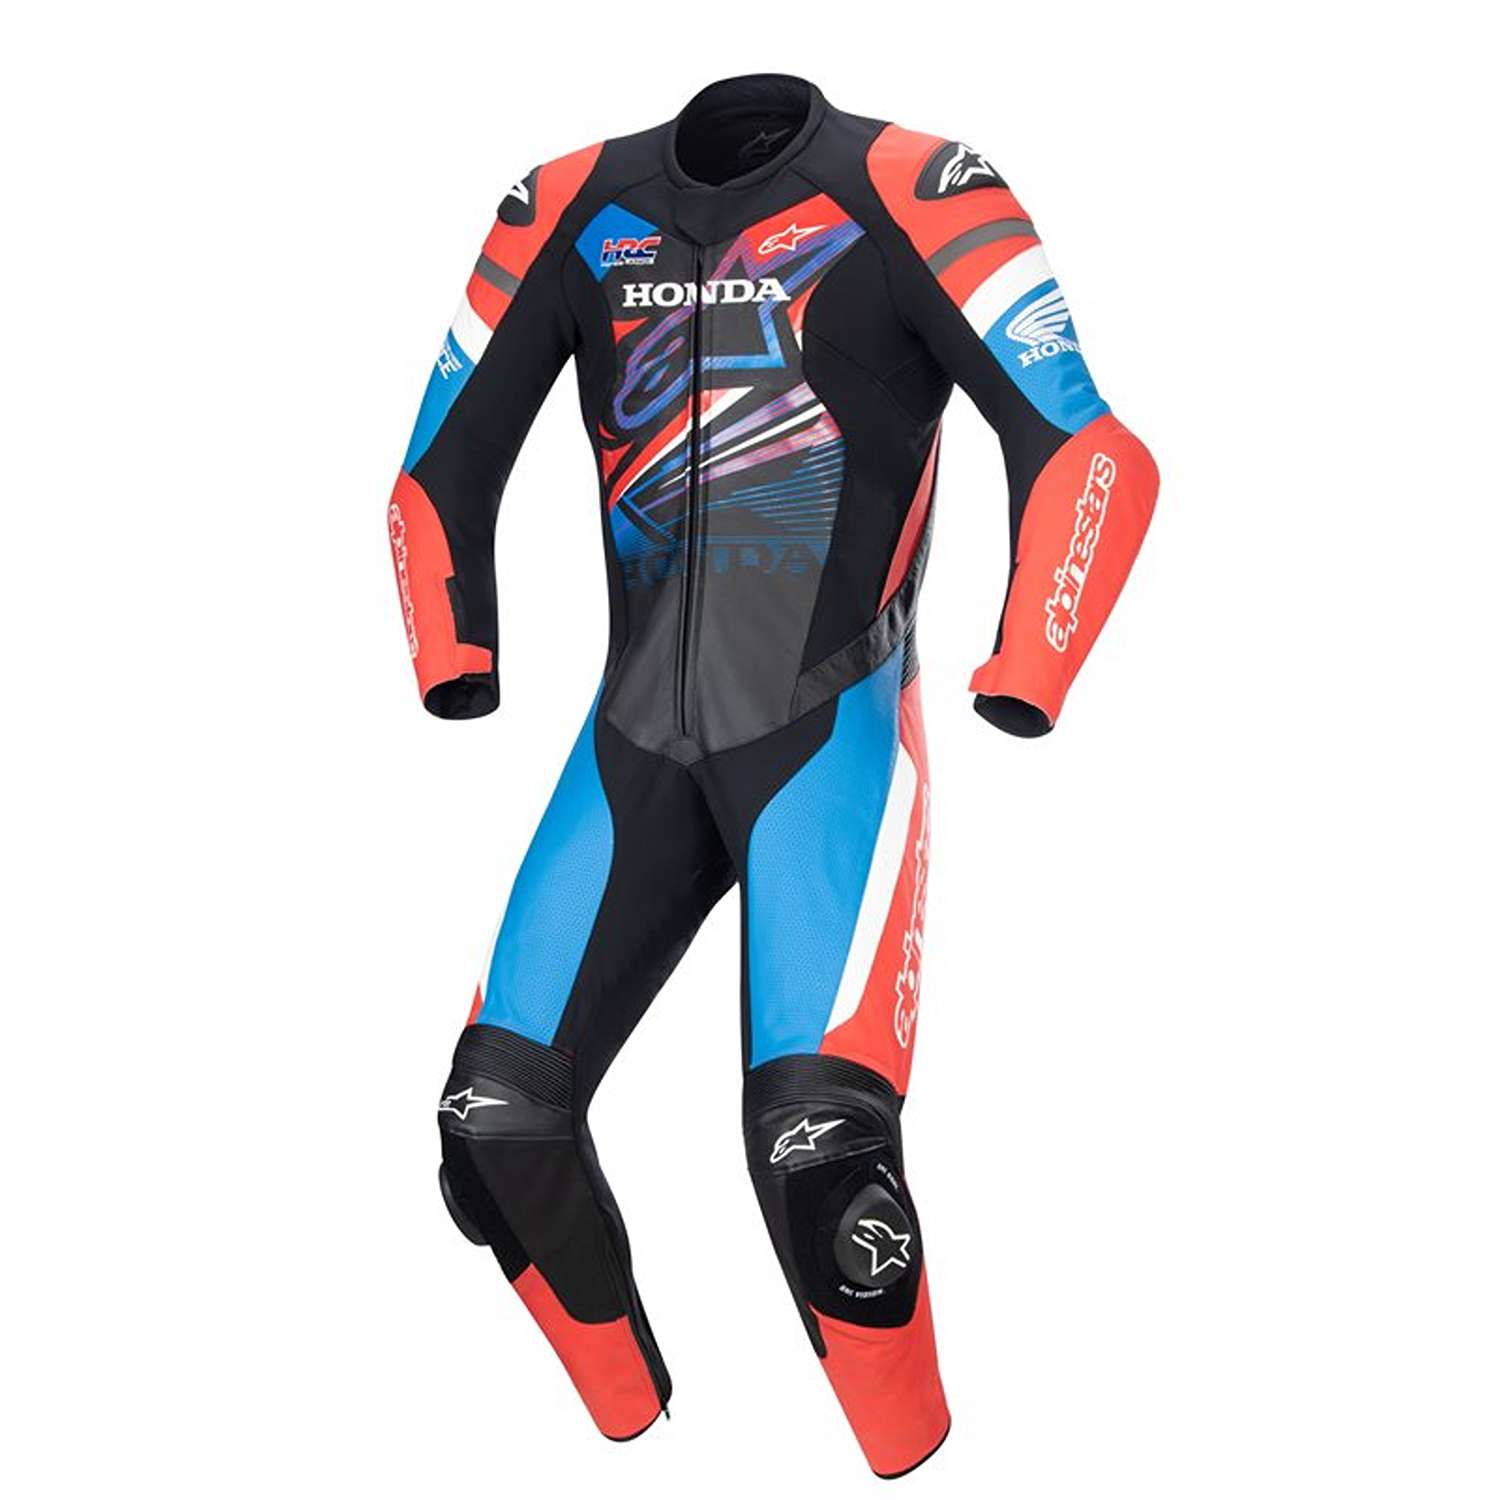 Image of EU Alpinestars Honda Gp Force Leather Suit Black Bright Red Blue Taille 48